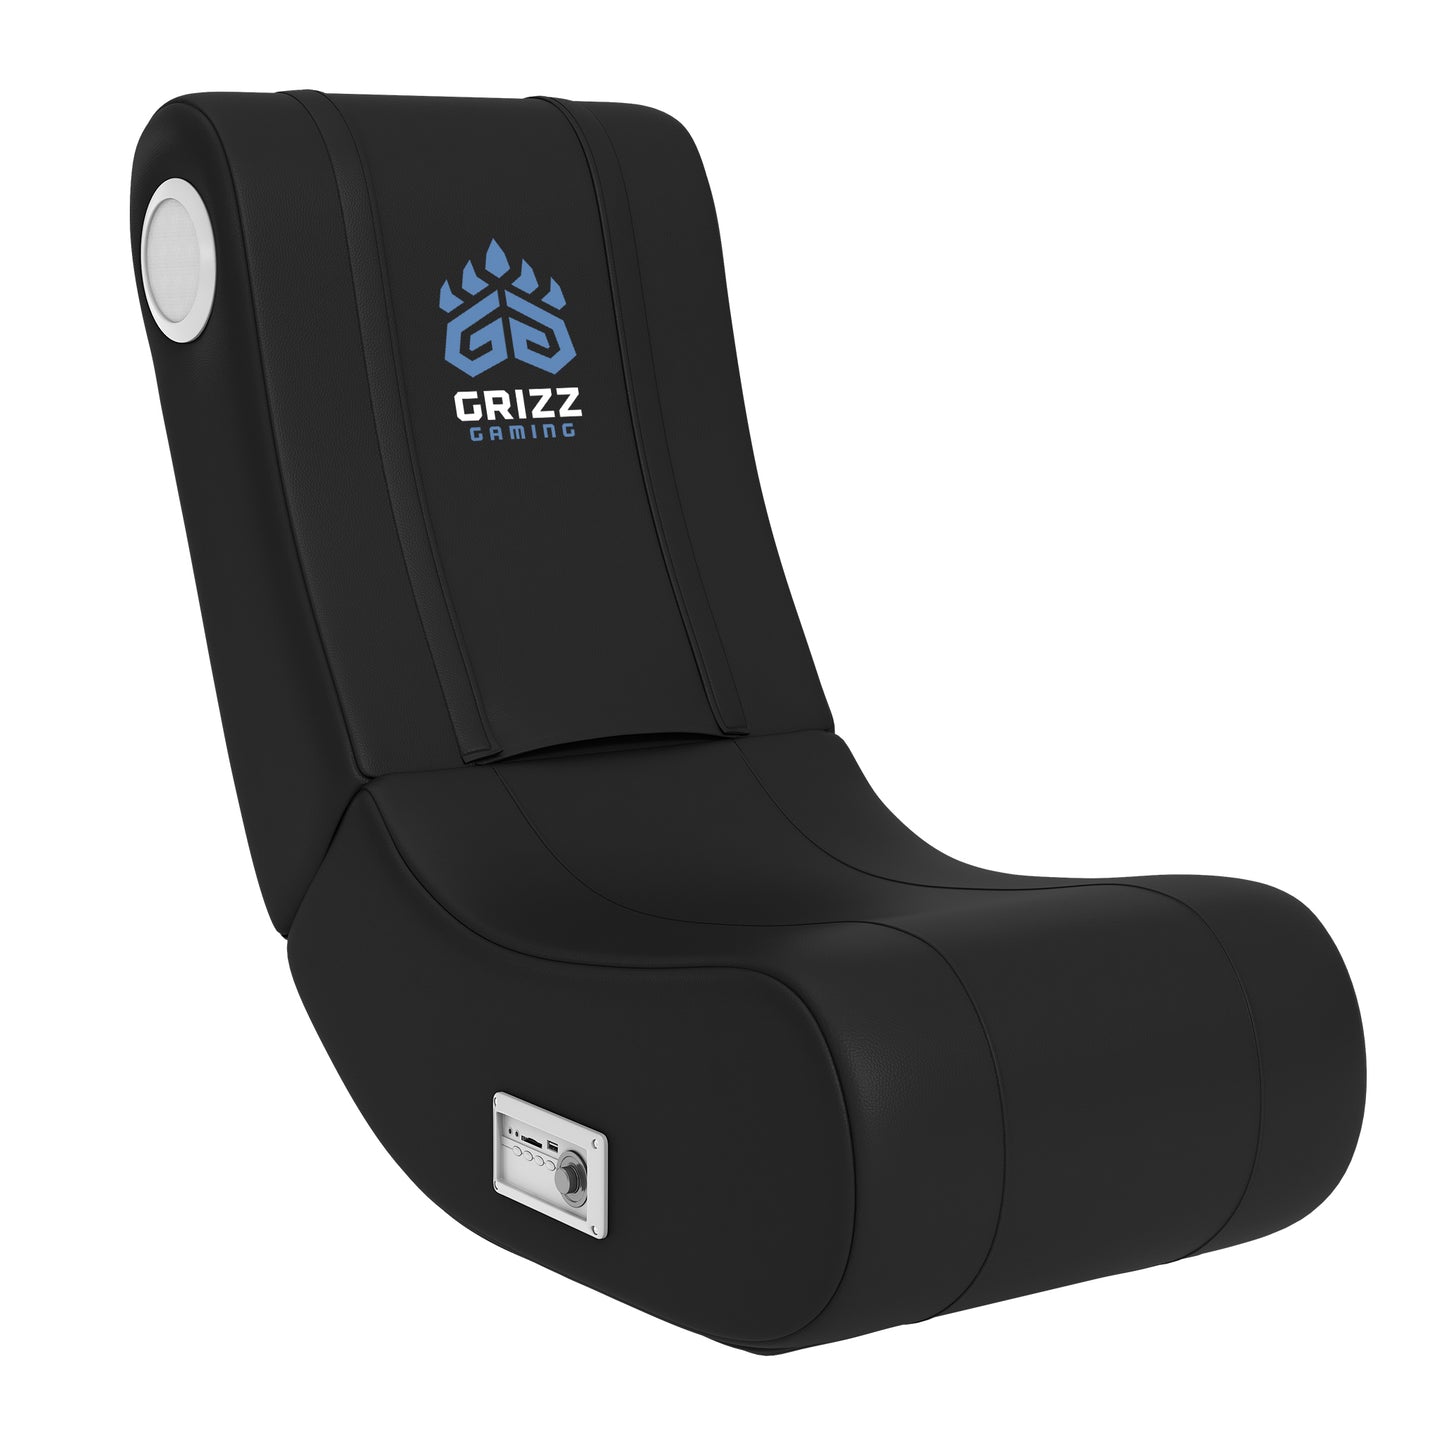 Game Rocker 100 with Memphis Grizz Gaming Logo